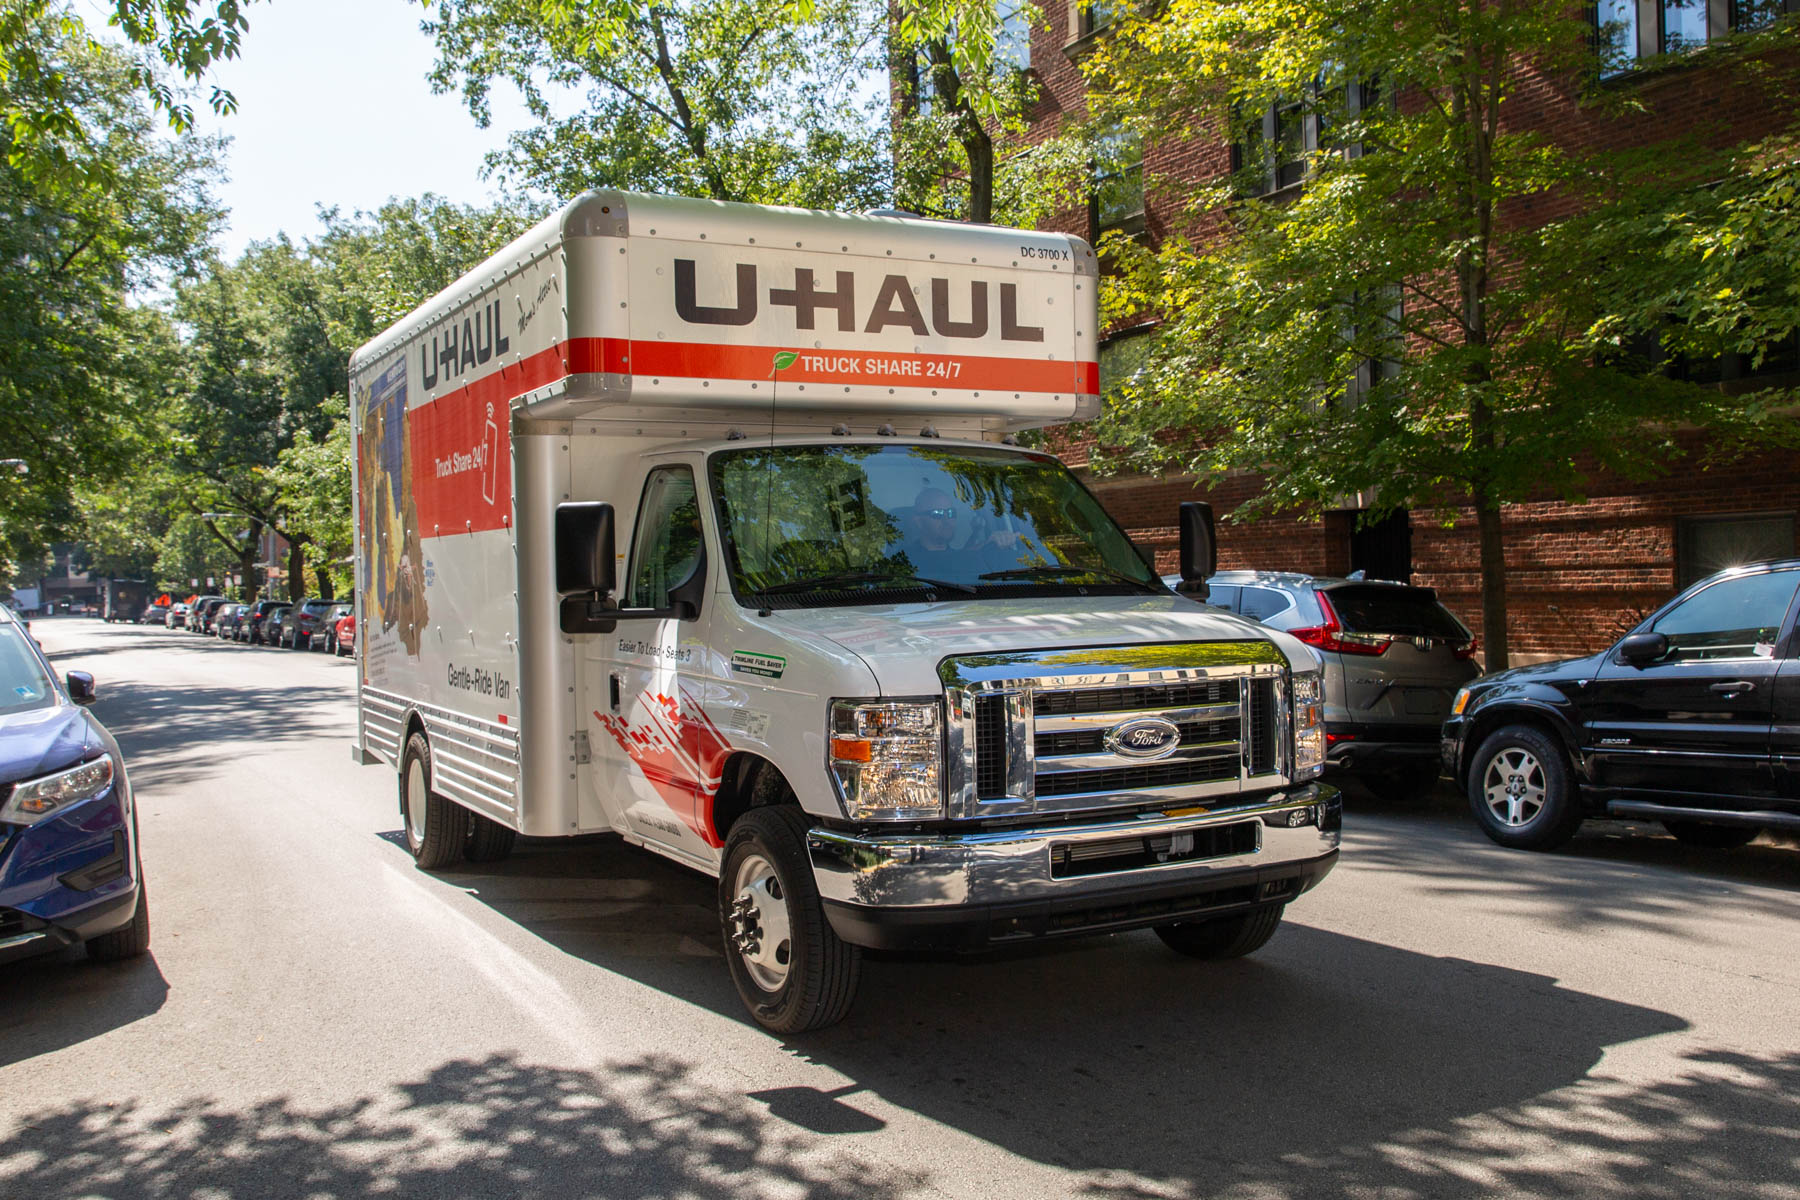 2020 Migration Trends: MISSOURI is the U-Haul No. 7 Growth State